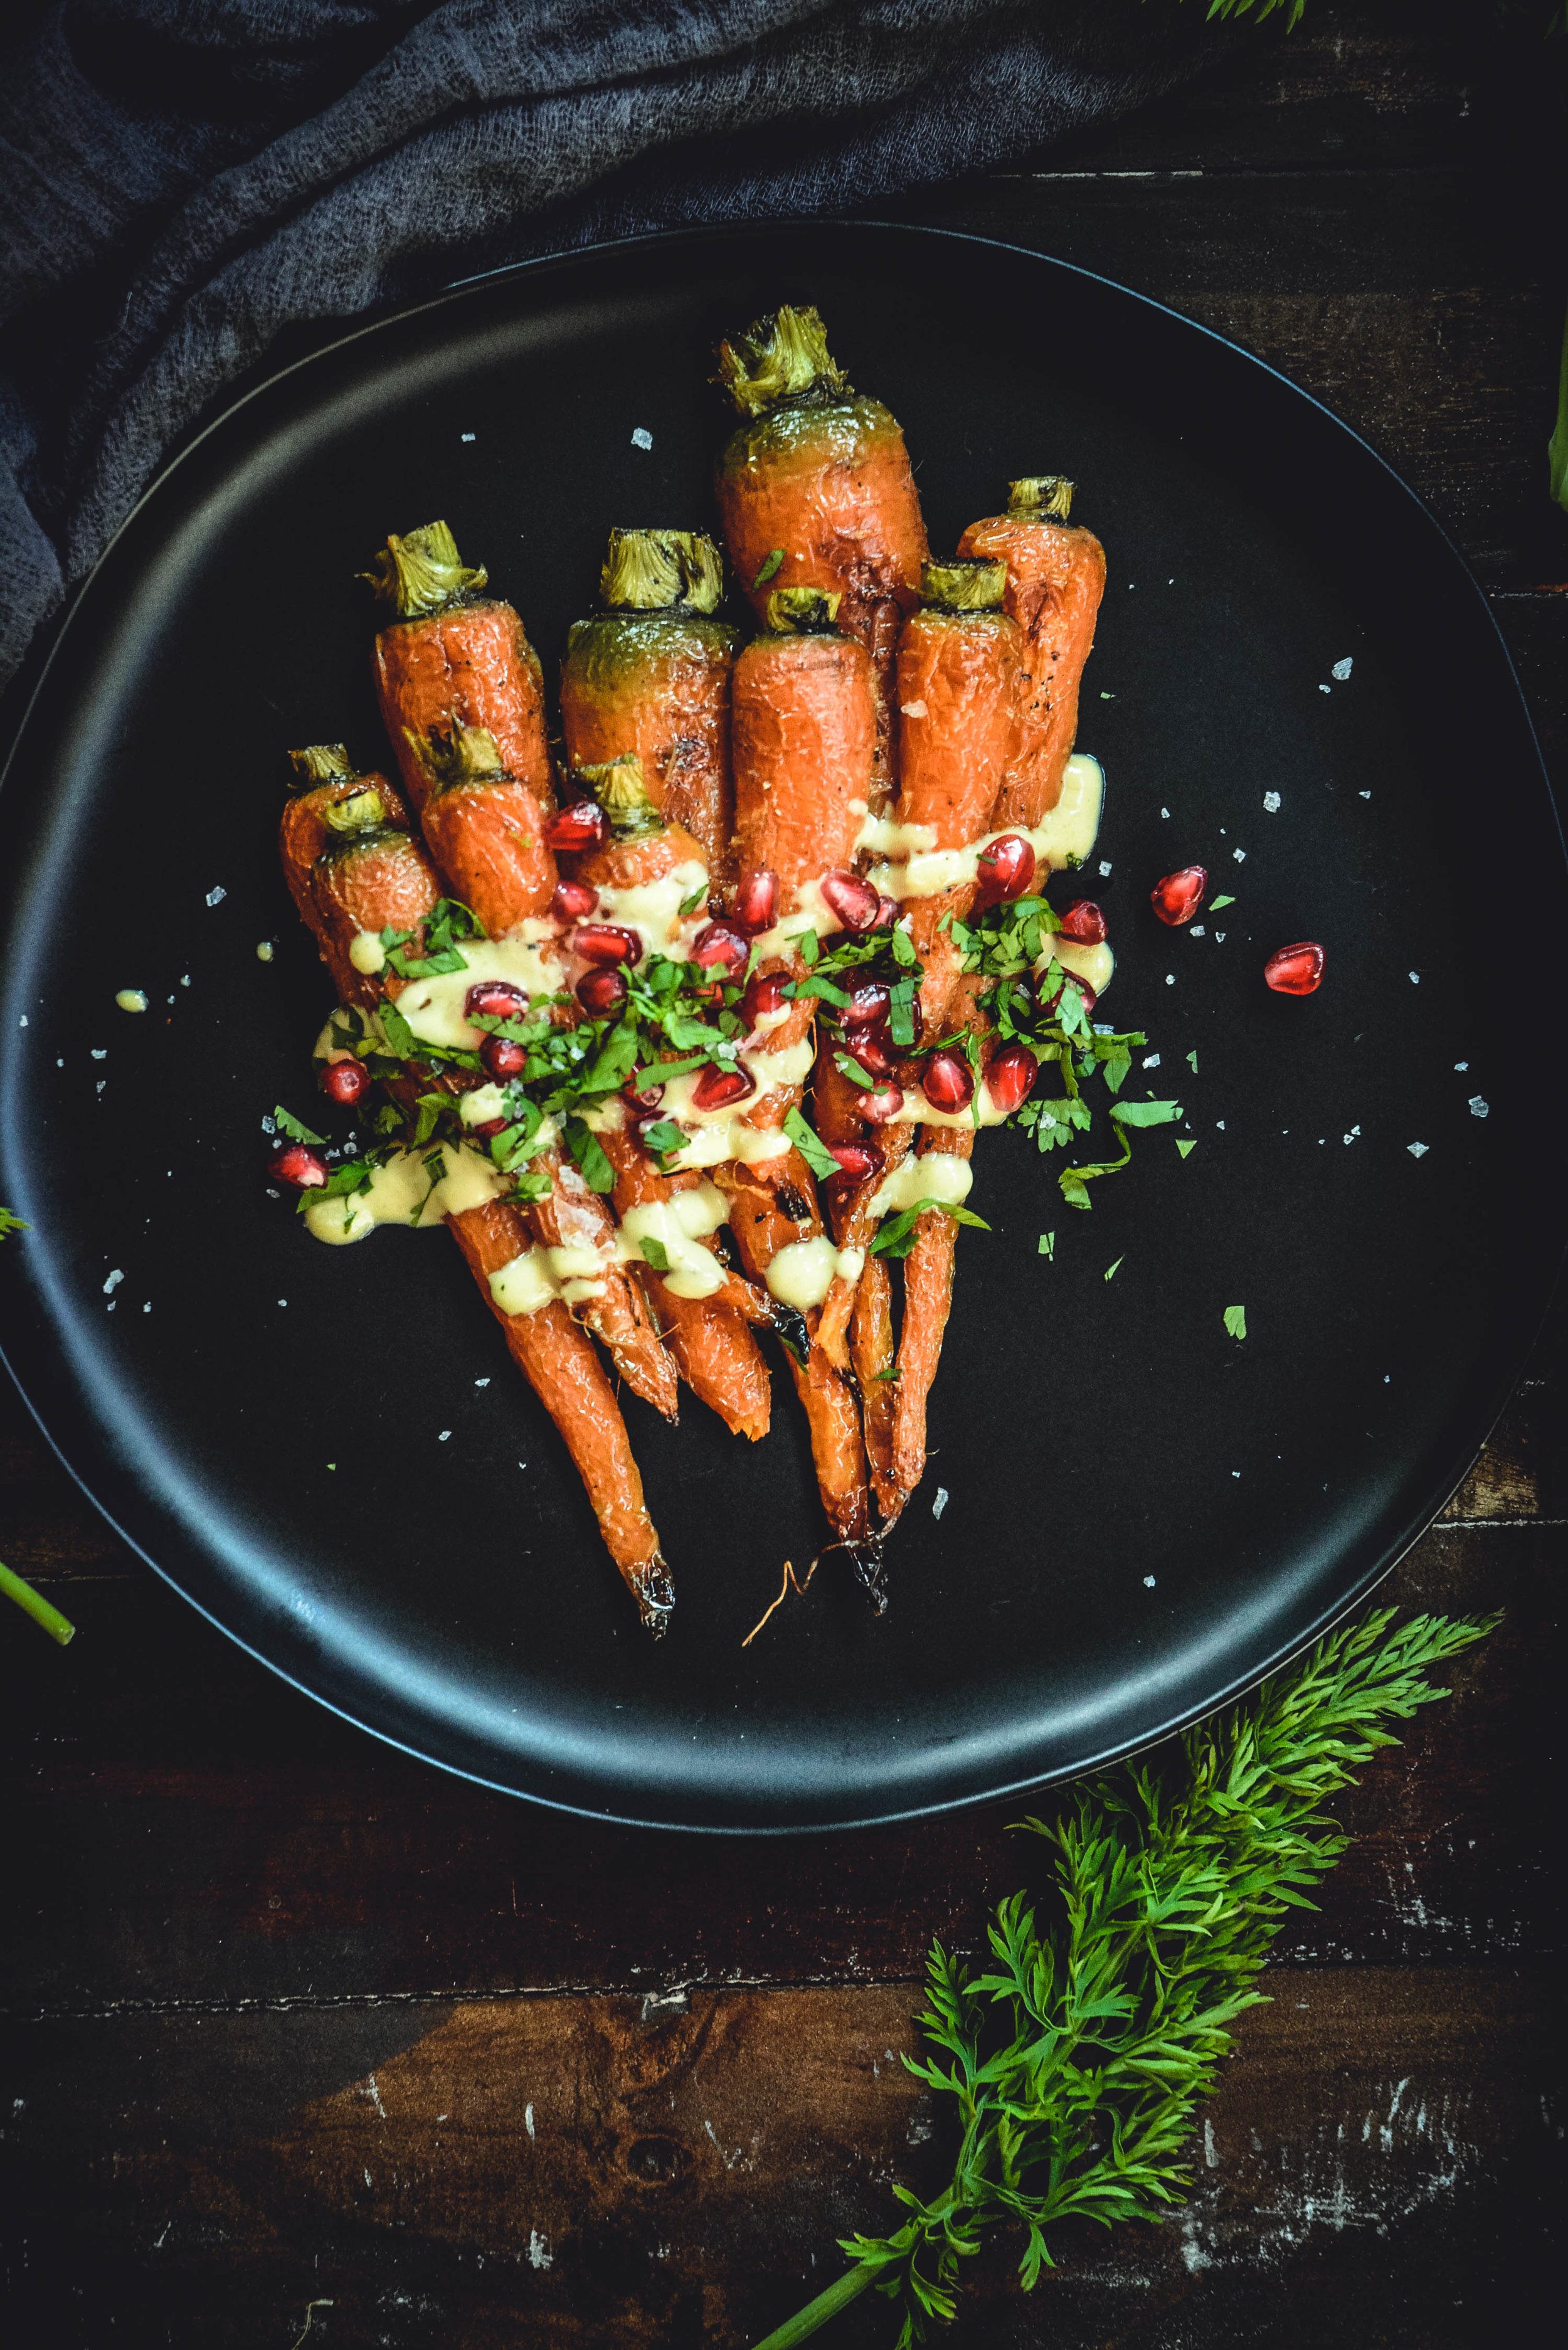 Roasted Carrots With A Simple Orange Tahini Sauce And Pomegranate on black plate